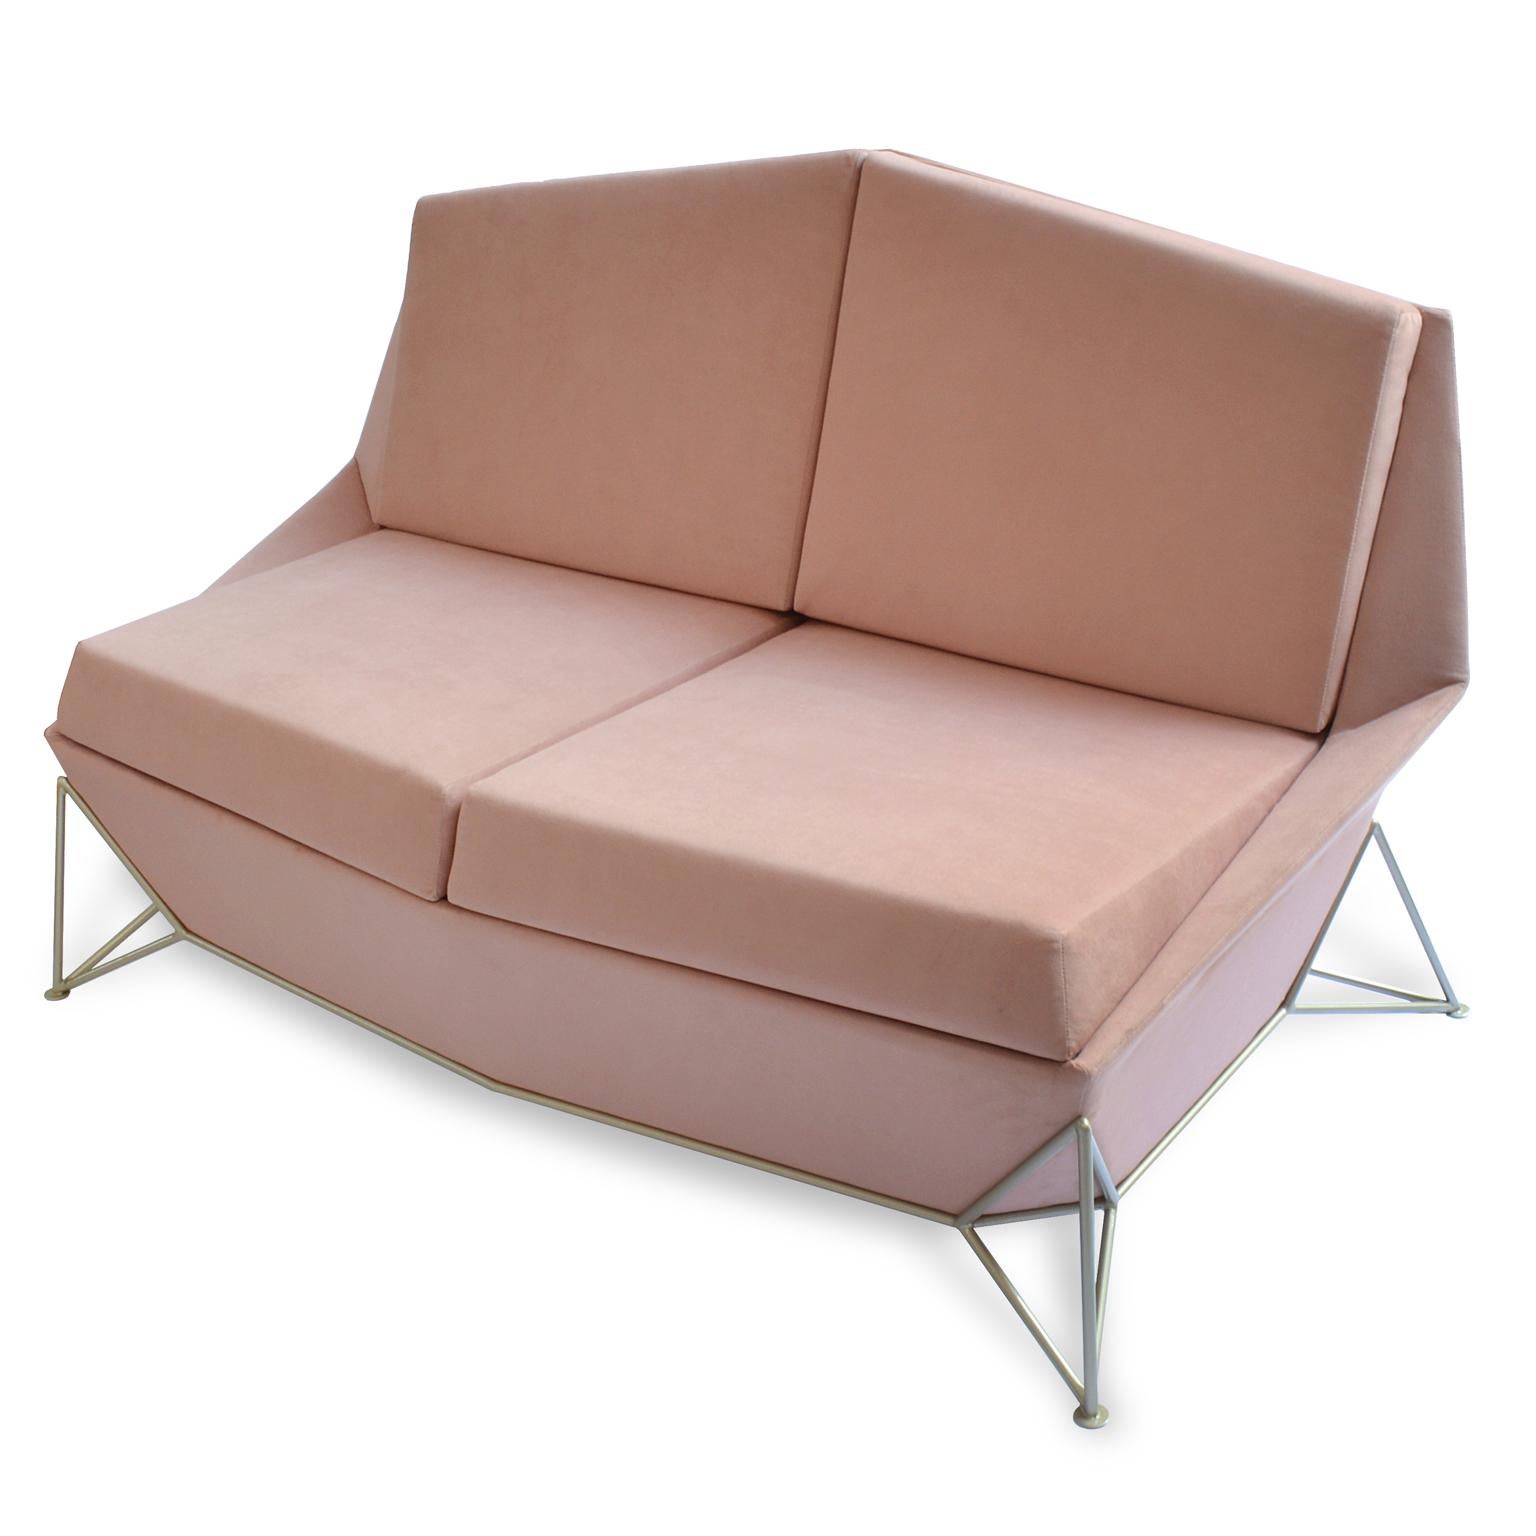 This contemporary styled sofa used a concept of triangulation what form for the structure of the feet, with this system the very weight of the sofa makes the structure fit and lock itself.

The rest of the contemporary sofa design, follows the same